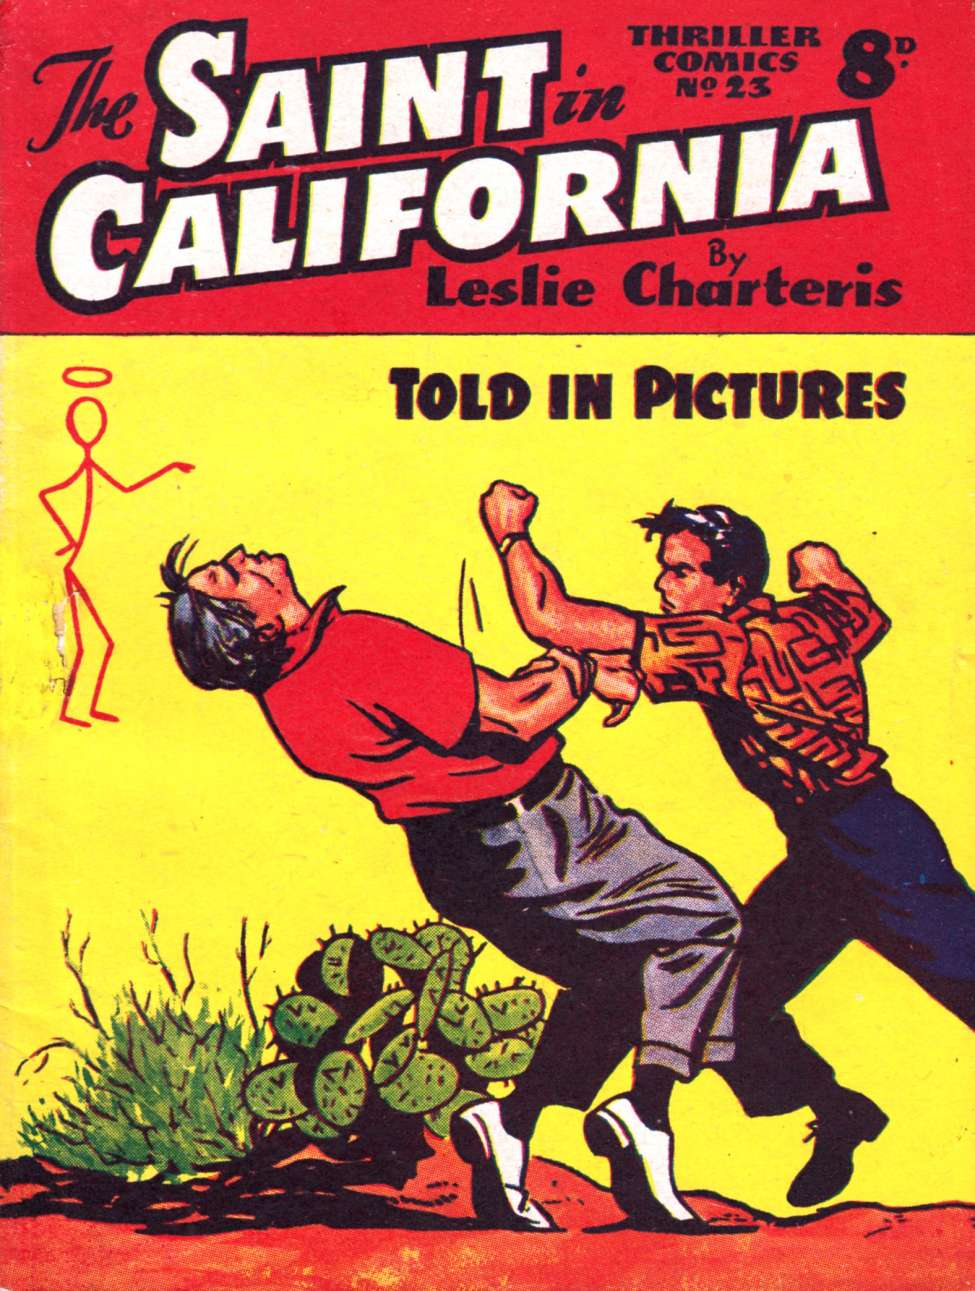 Book Cover For Thriller Comics 23 - The Saint in California